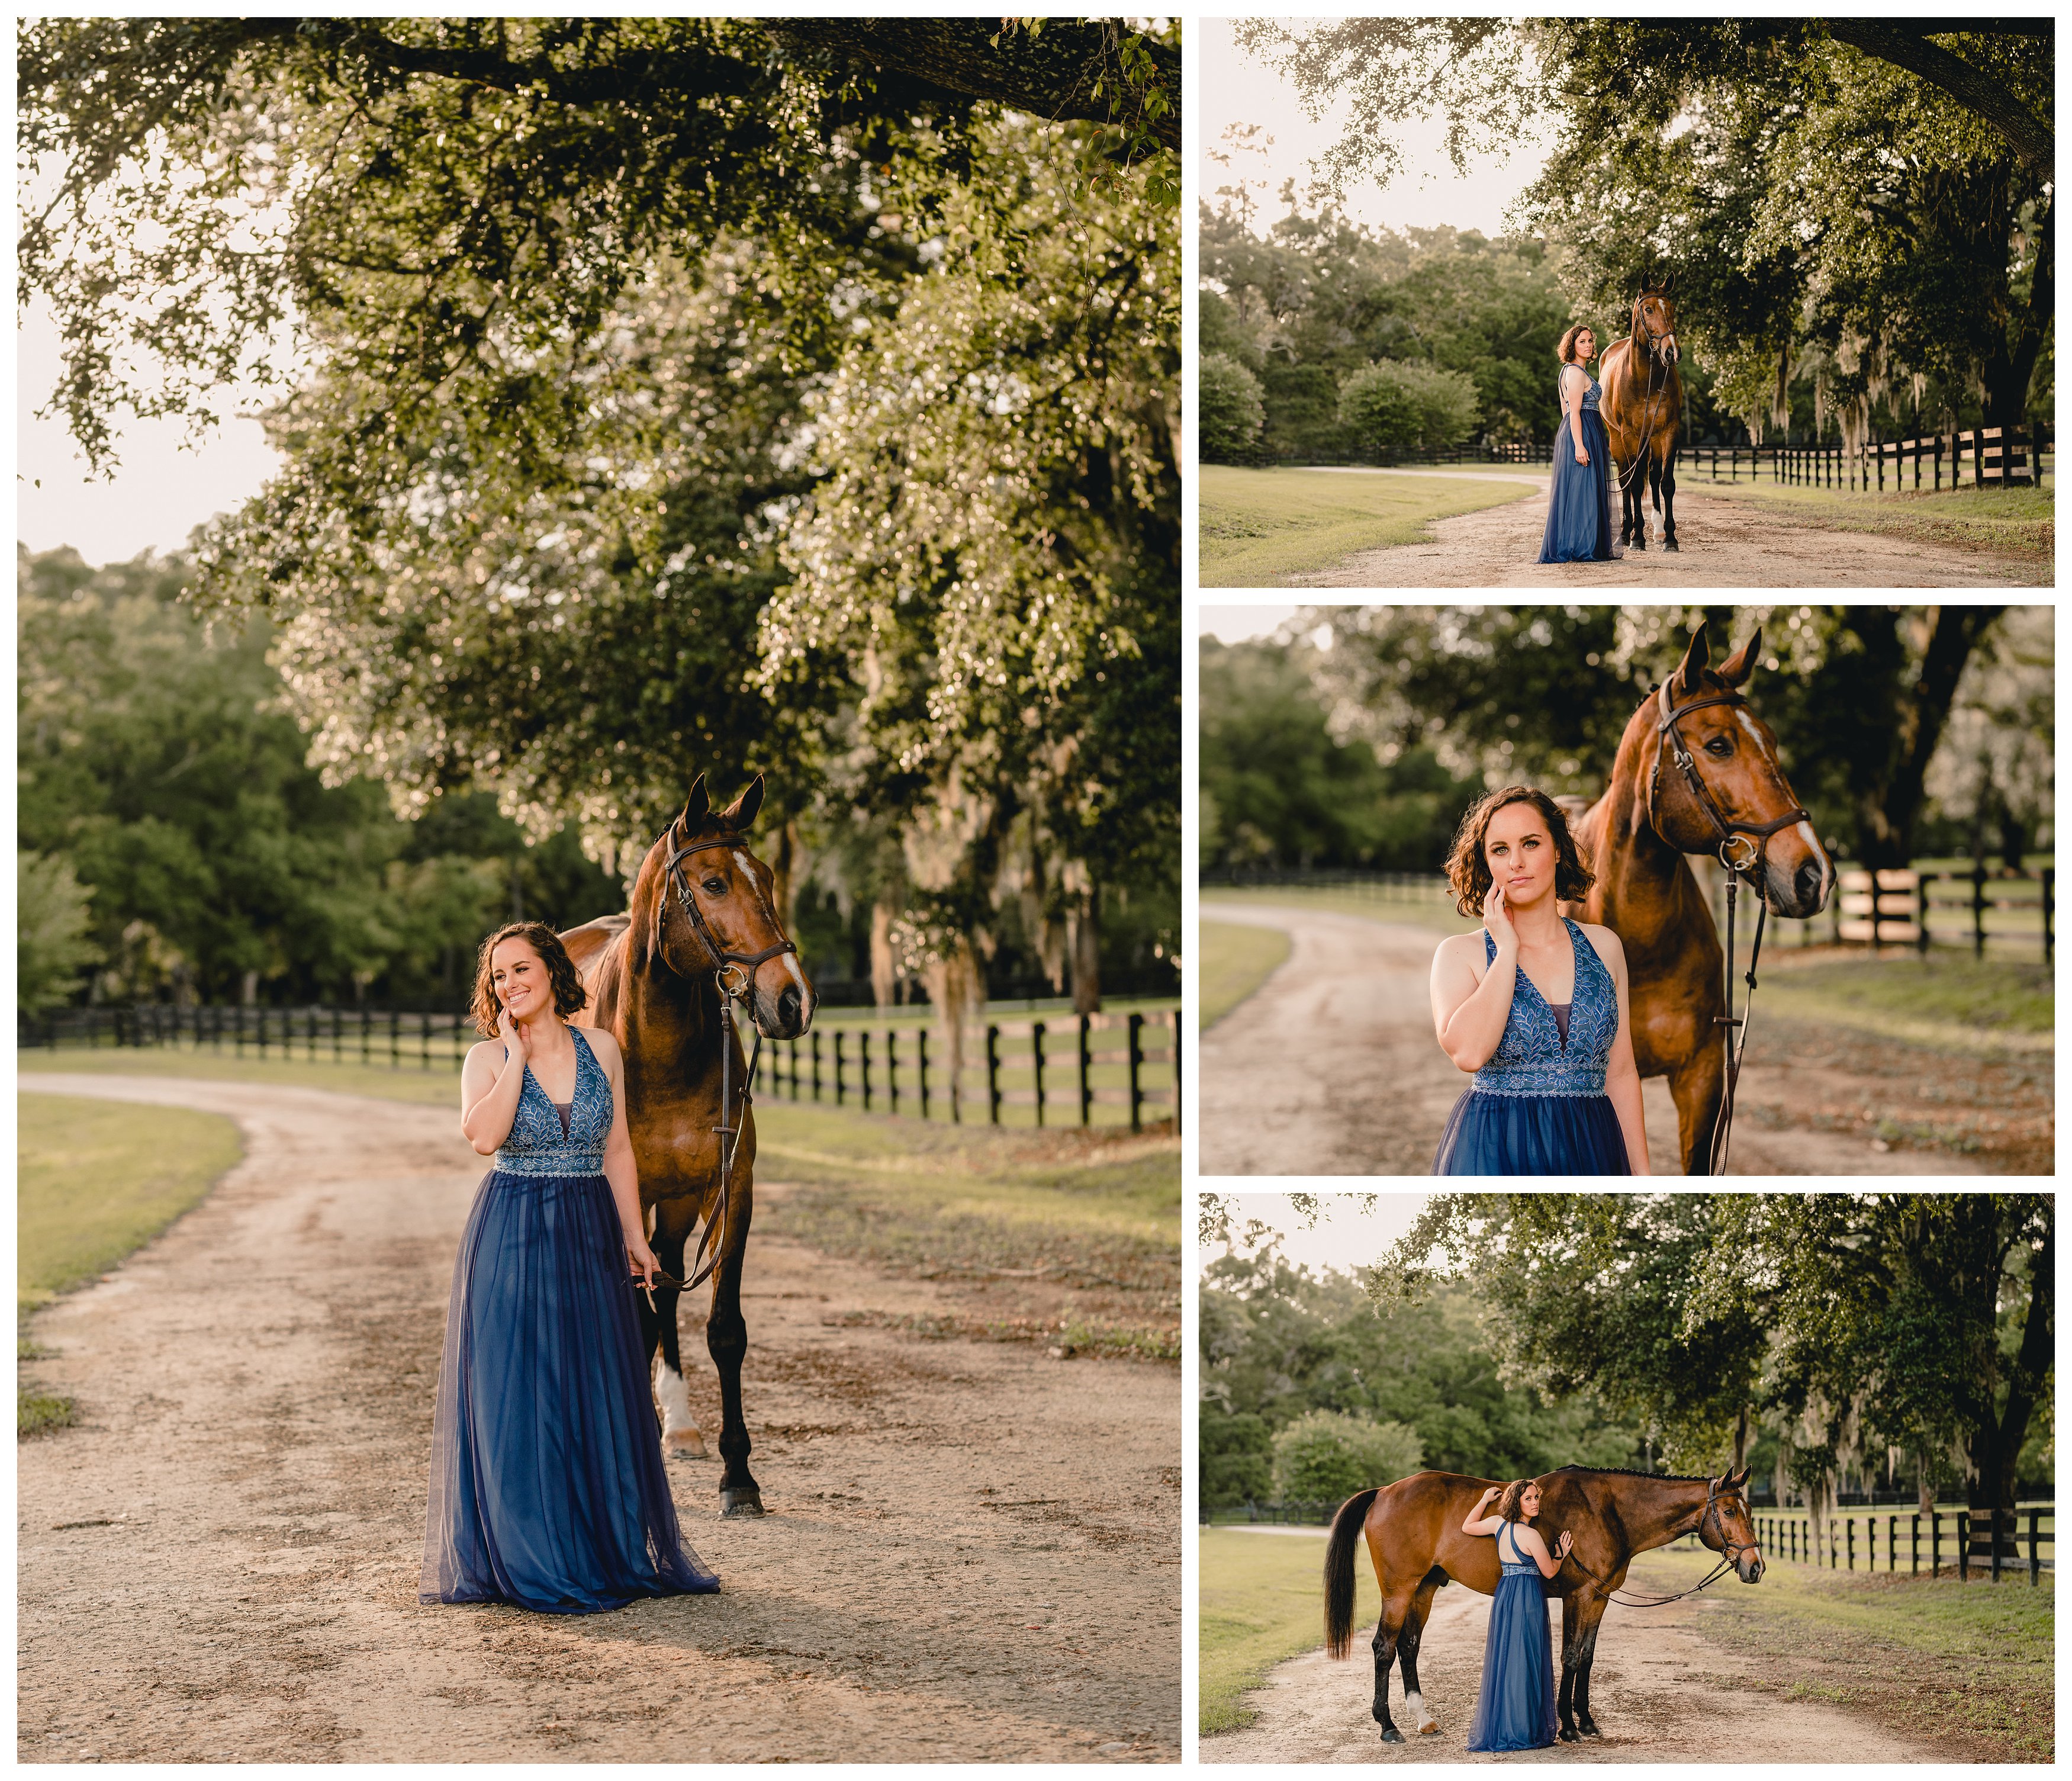 Horse and rider pictures with girl wearing a long formal dress taken in barn driveway.